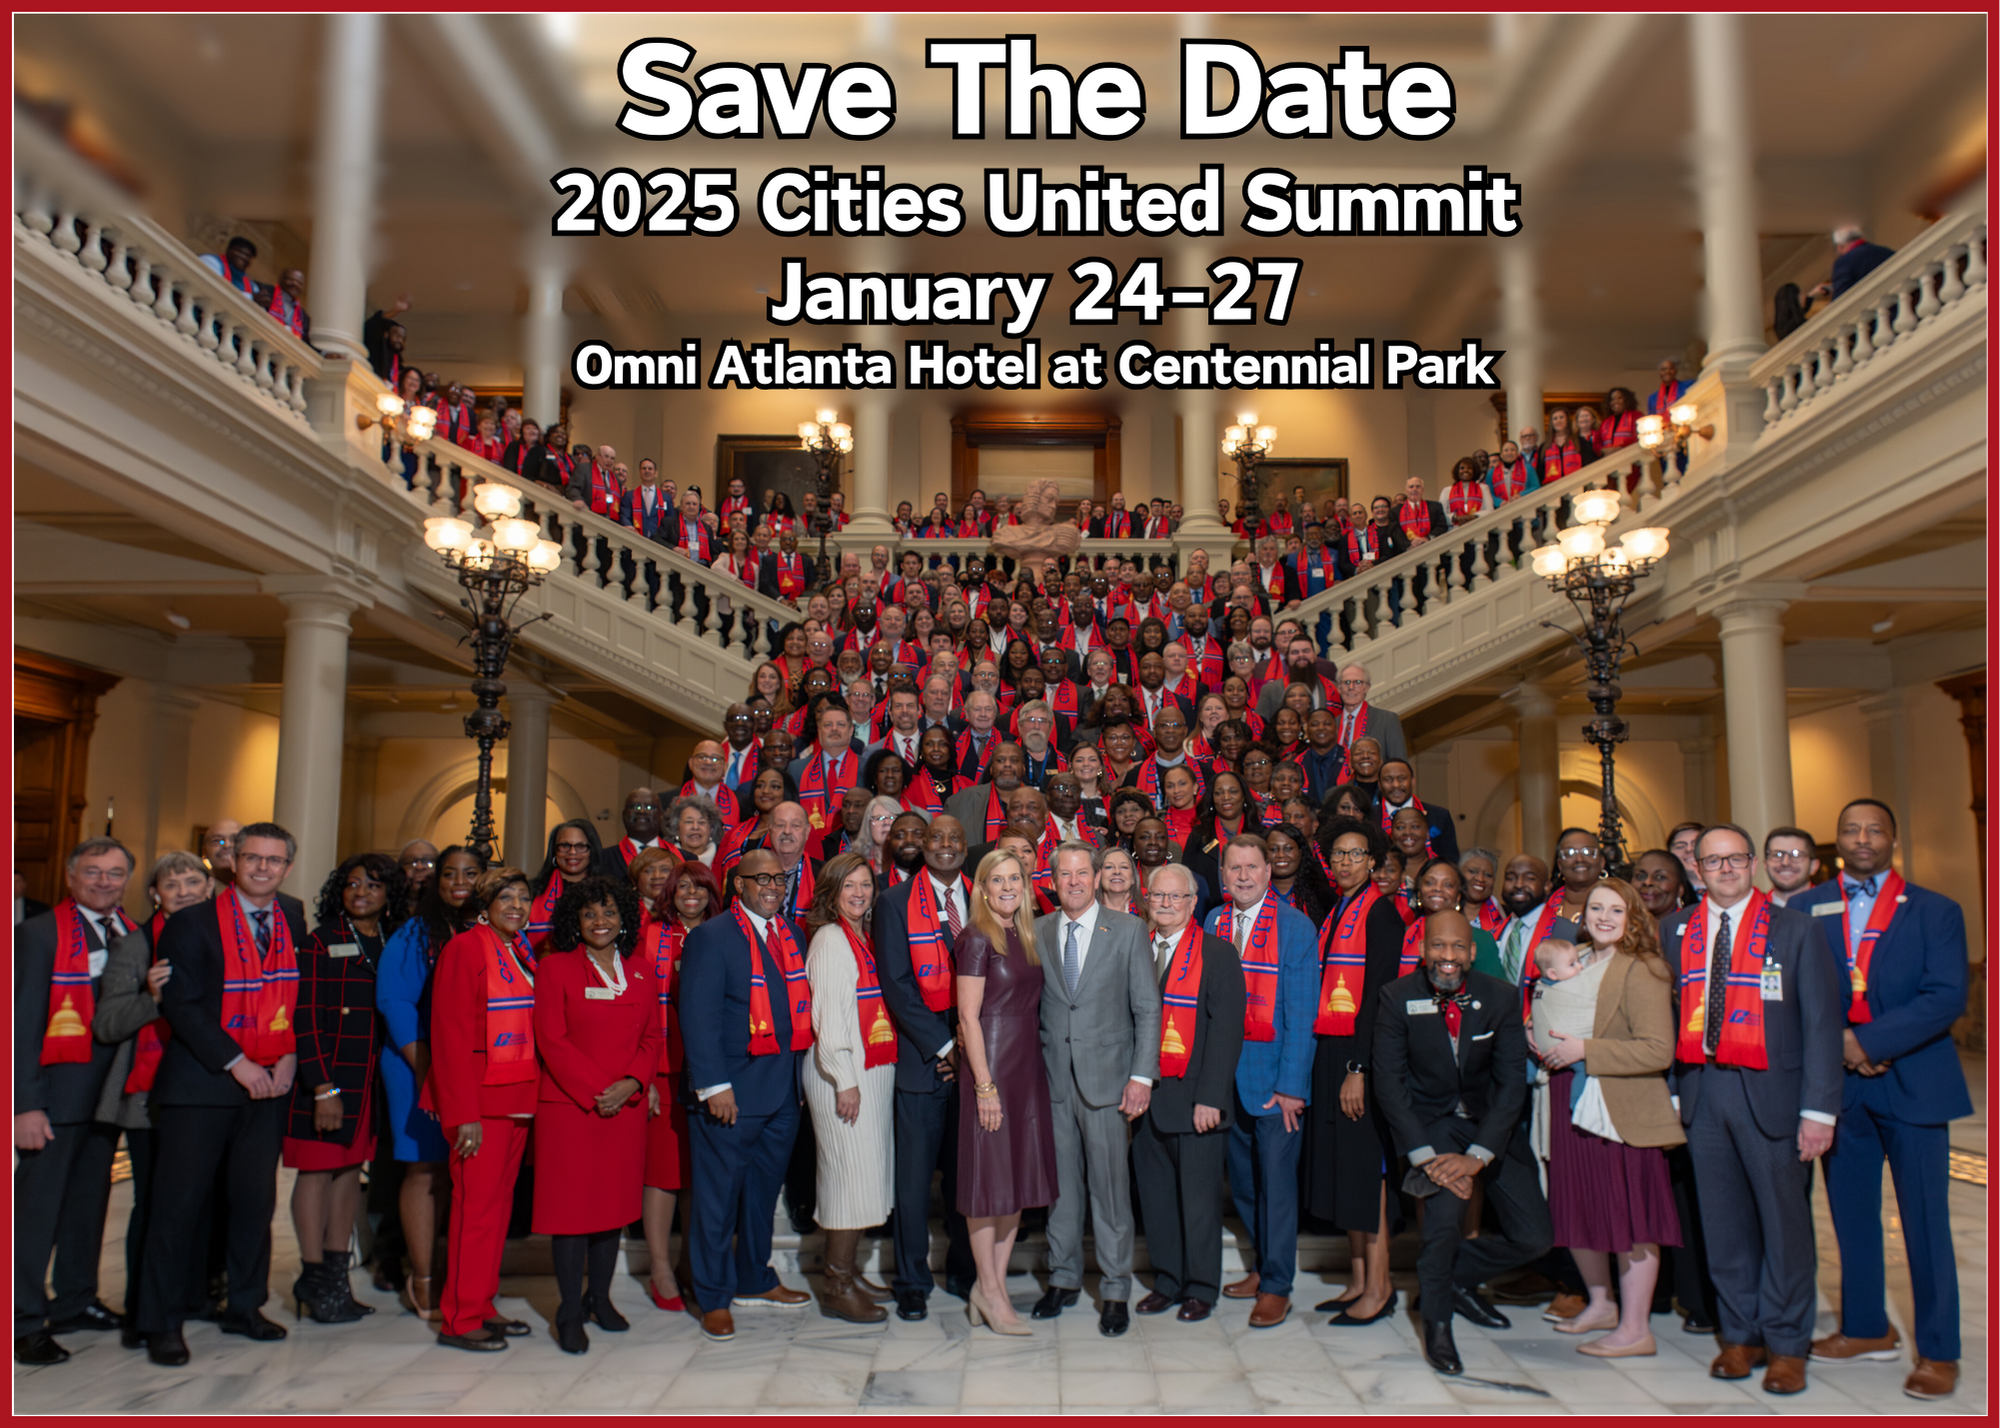 Save The Date: 2025 Cities United Summit, January 24 through 27, Omni Atlanta Hotel at Centennial Park